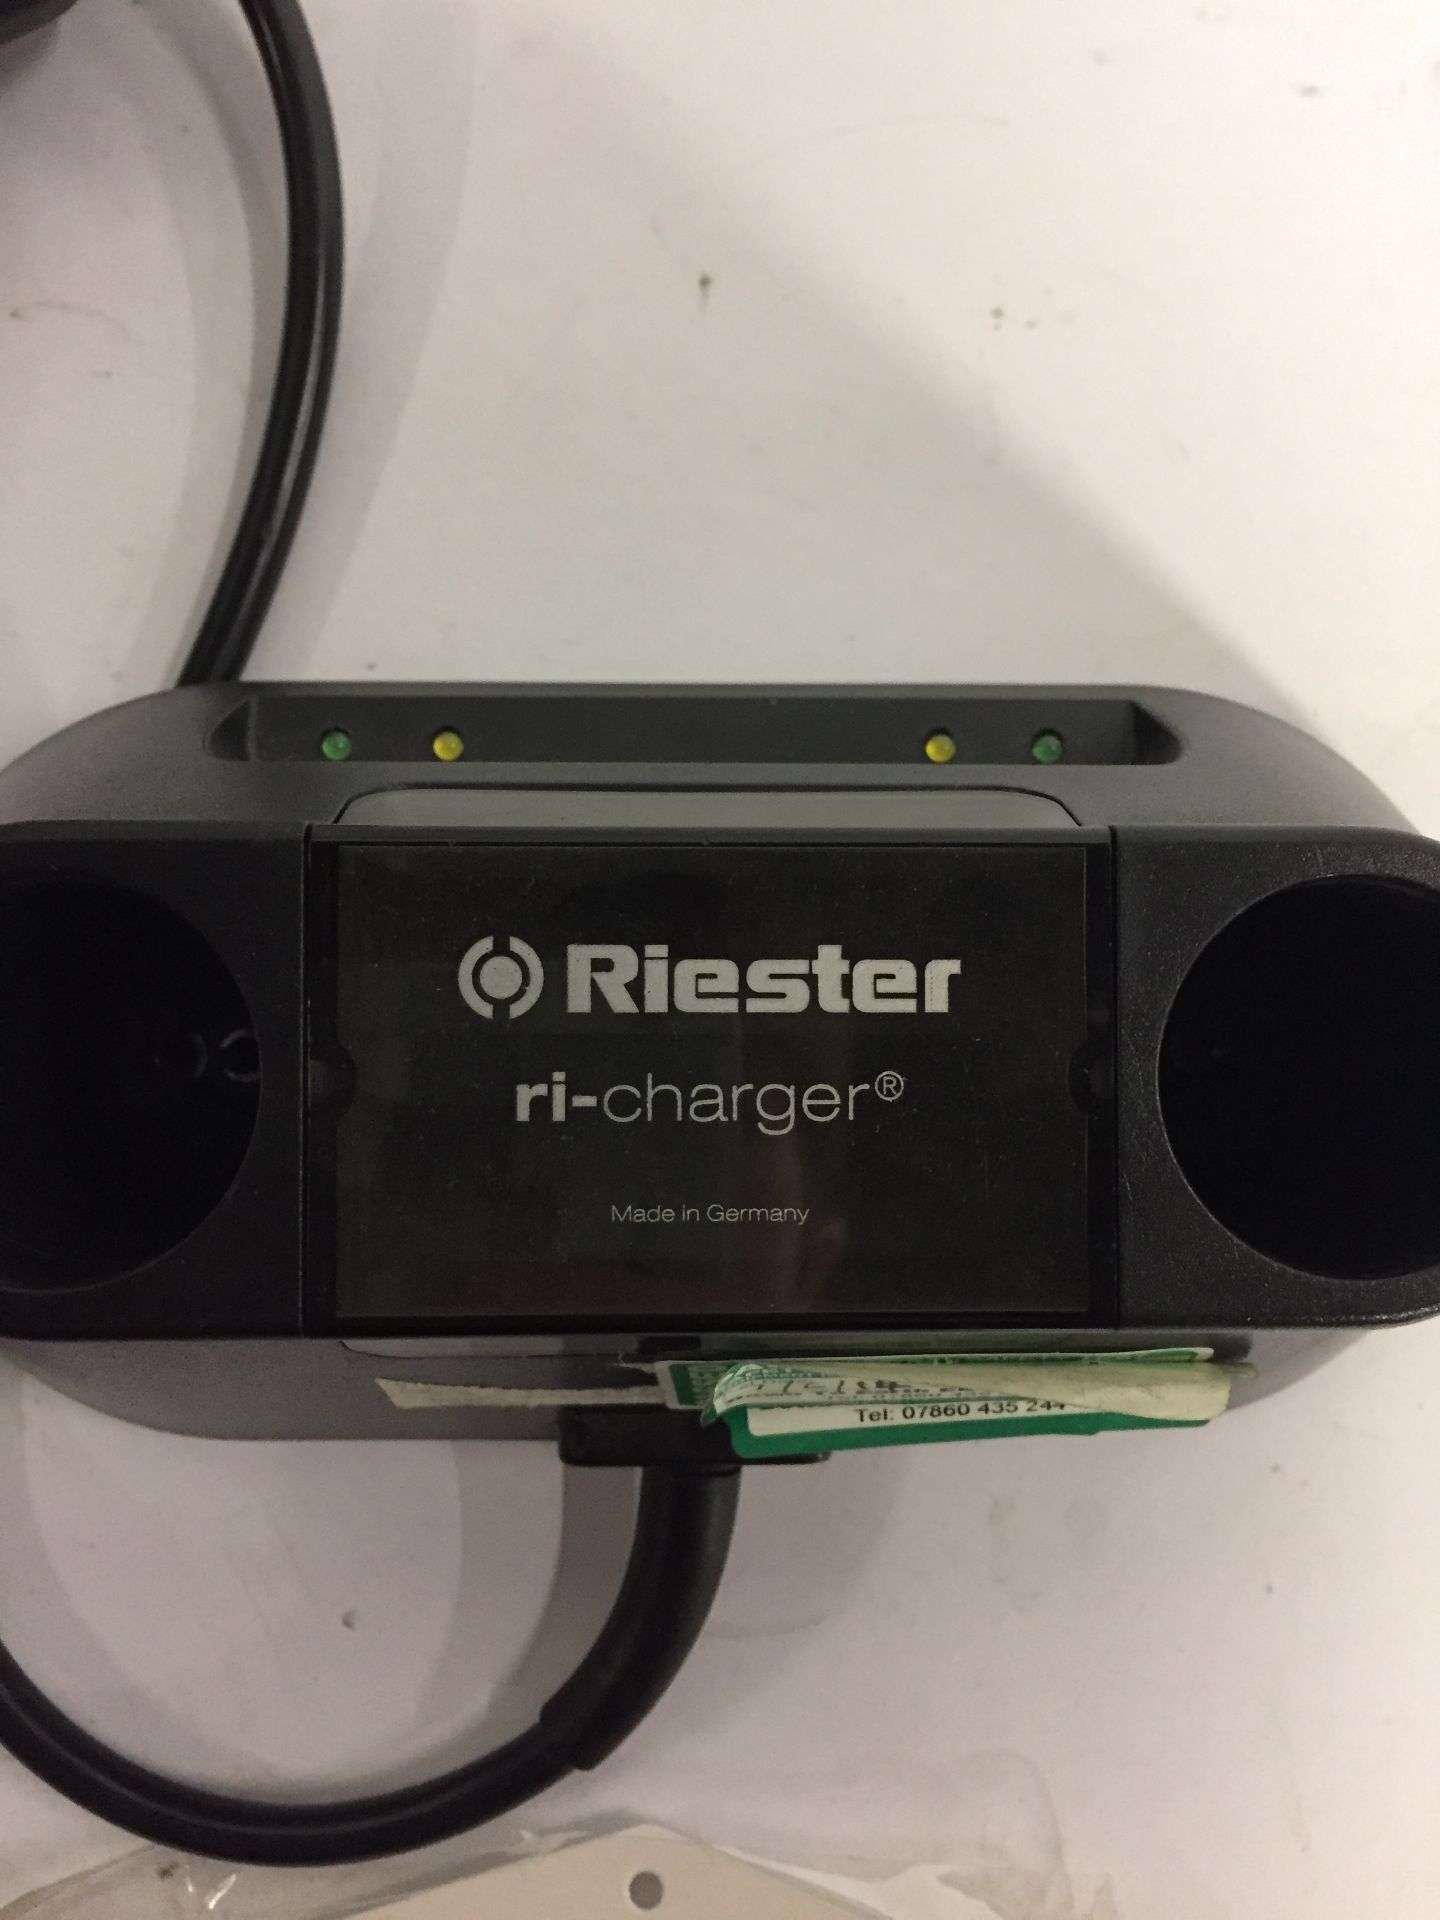 Riester ri-charger - Image 2 of 3